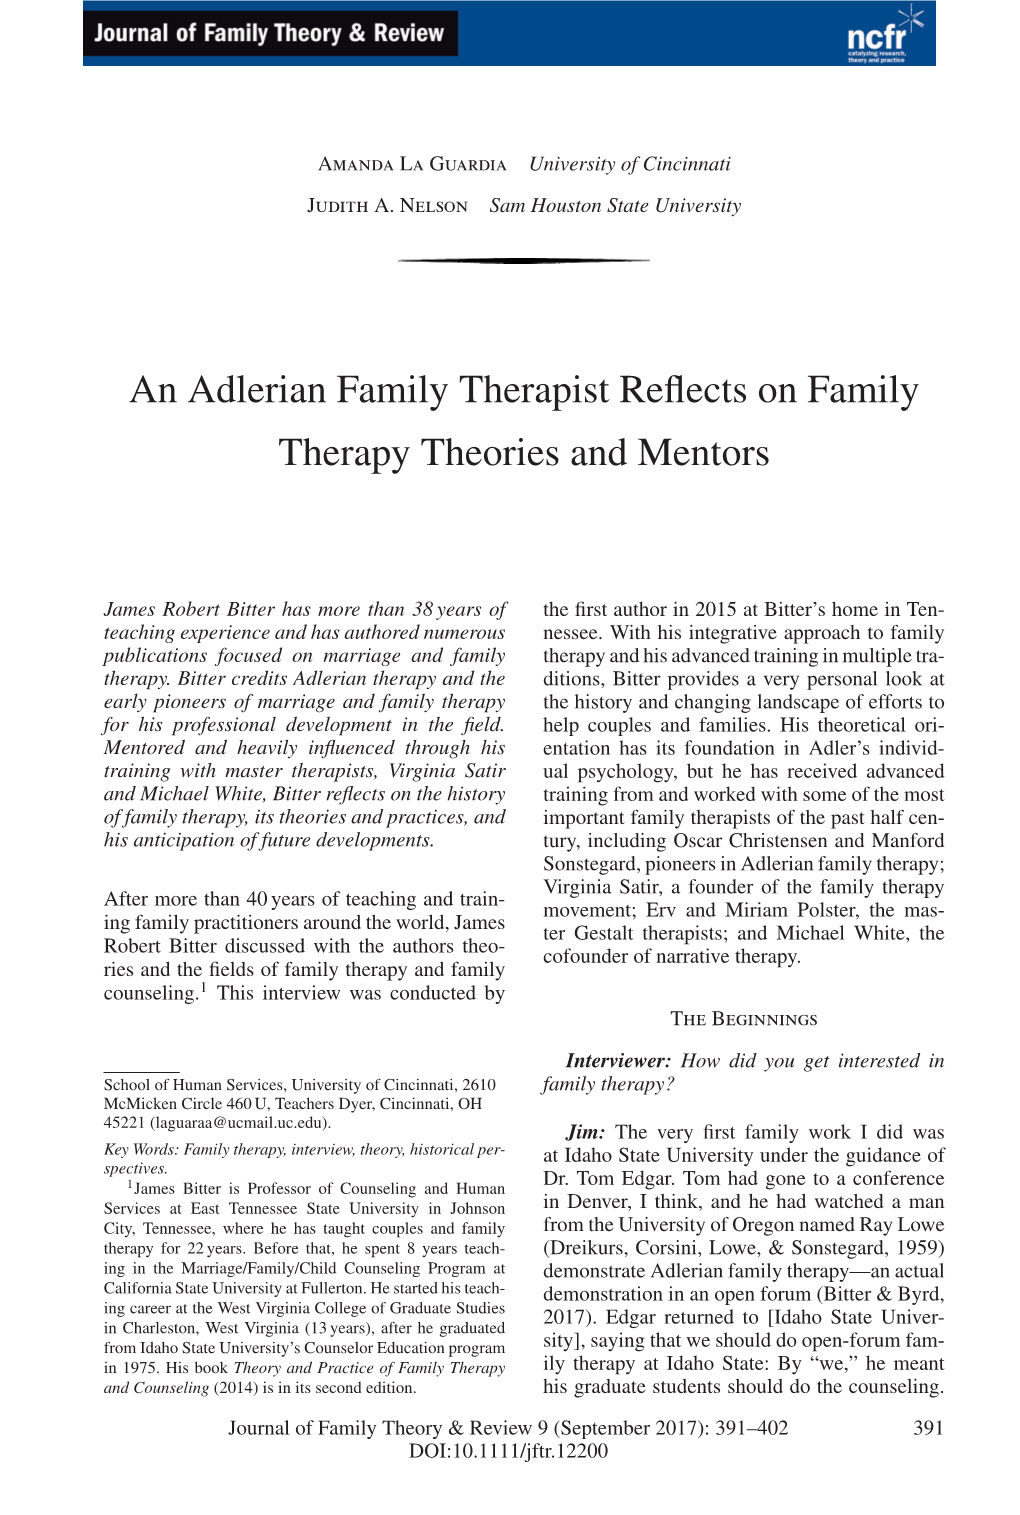 An Adlerian Family Therapist Reflects on Family Therapy Theories and Mentors